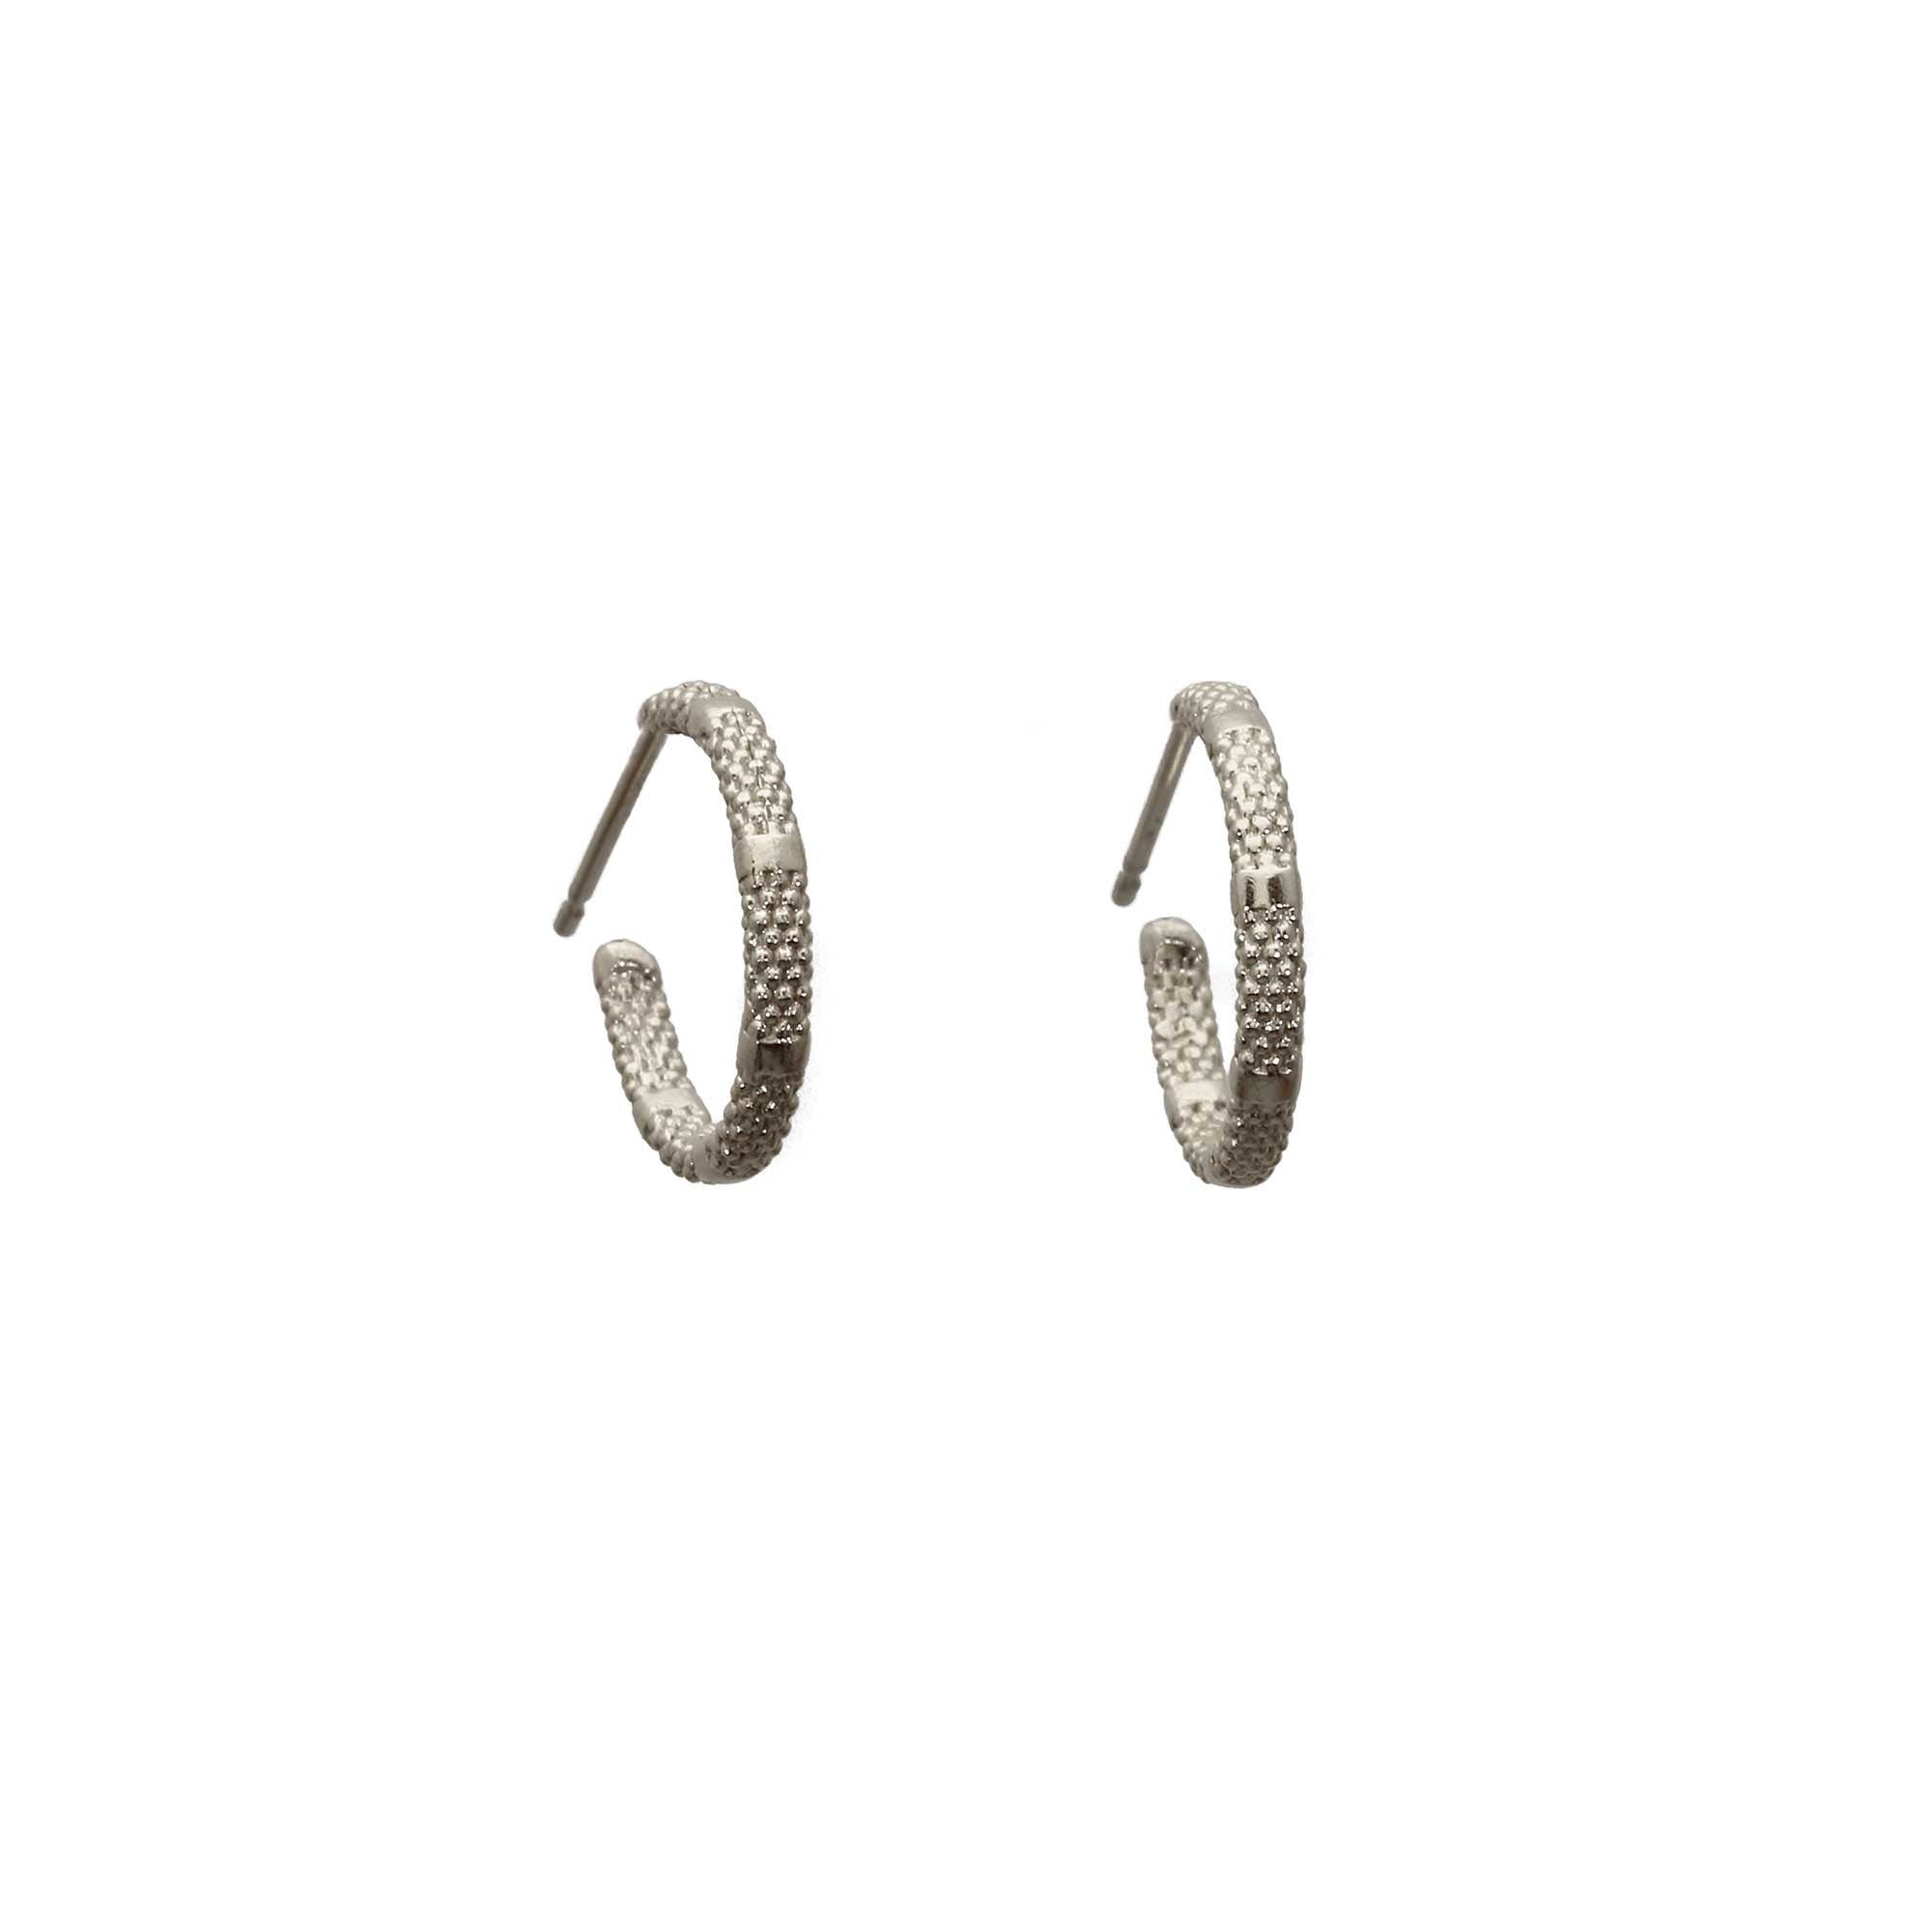 Sterling silver hoop earrings with alternating rough and smooth texture